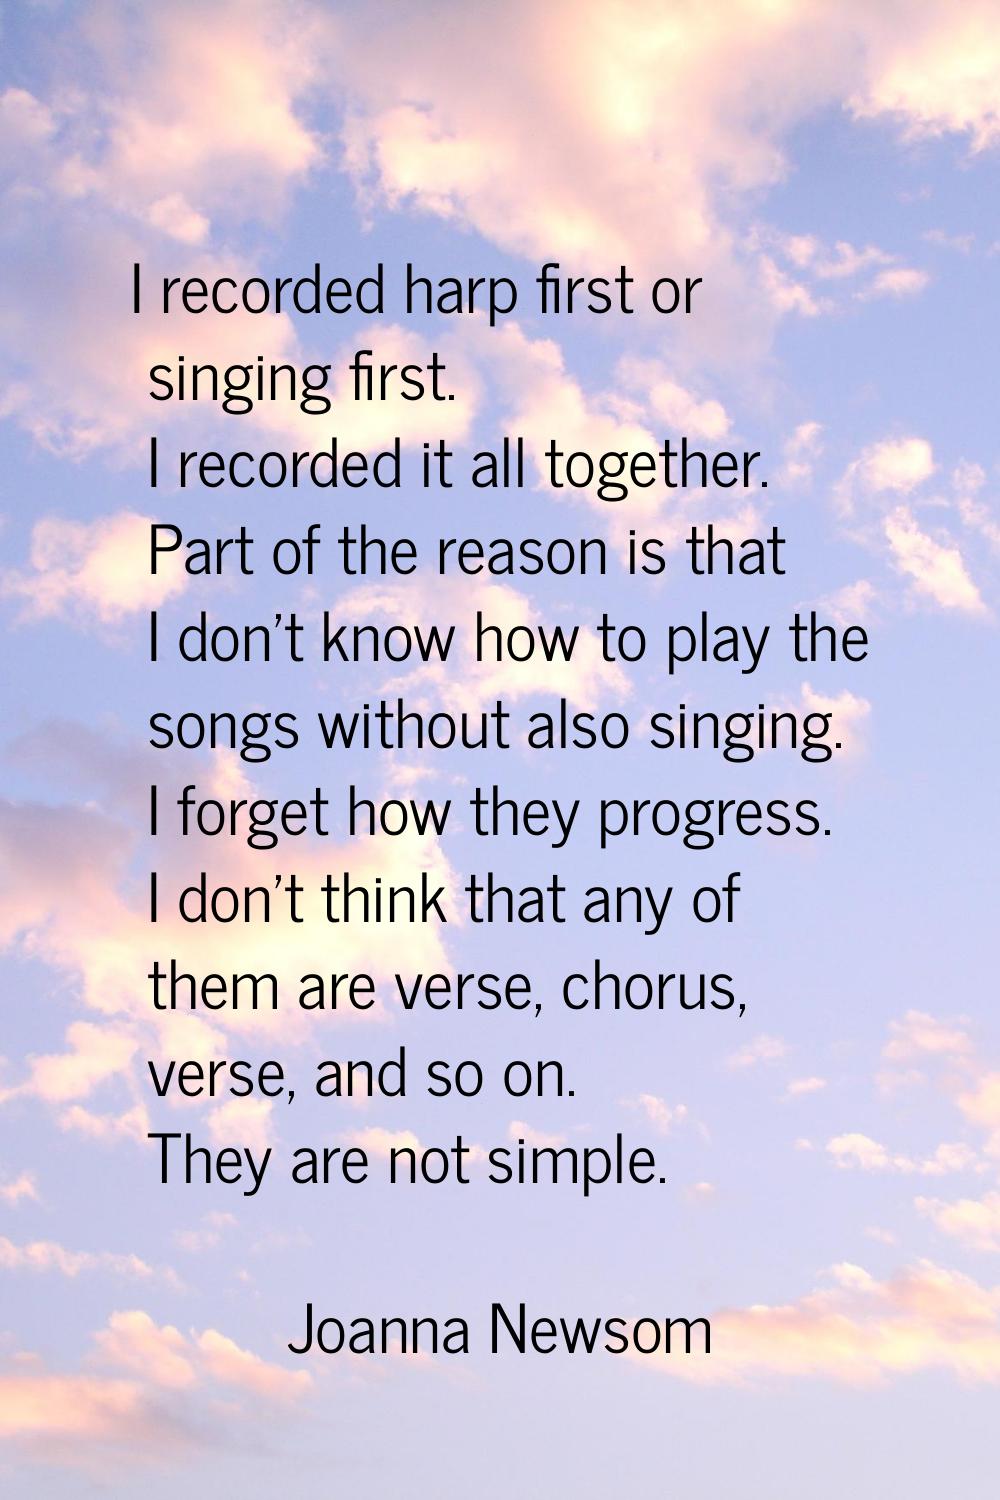 I recorded harp first or singing first. I recorded it all together. Part of the reason is that I do